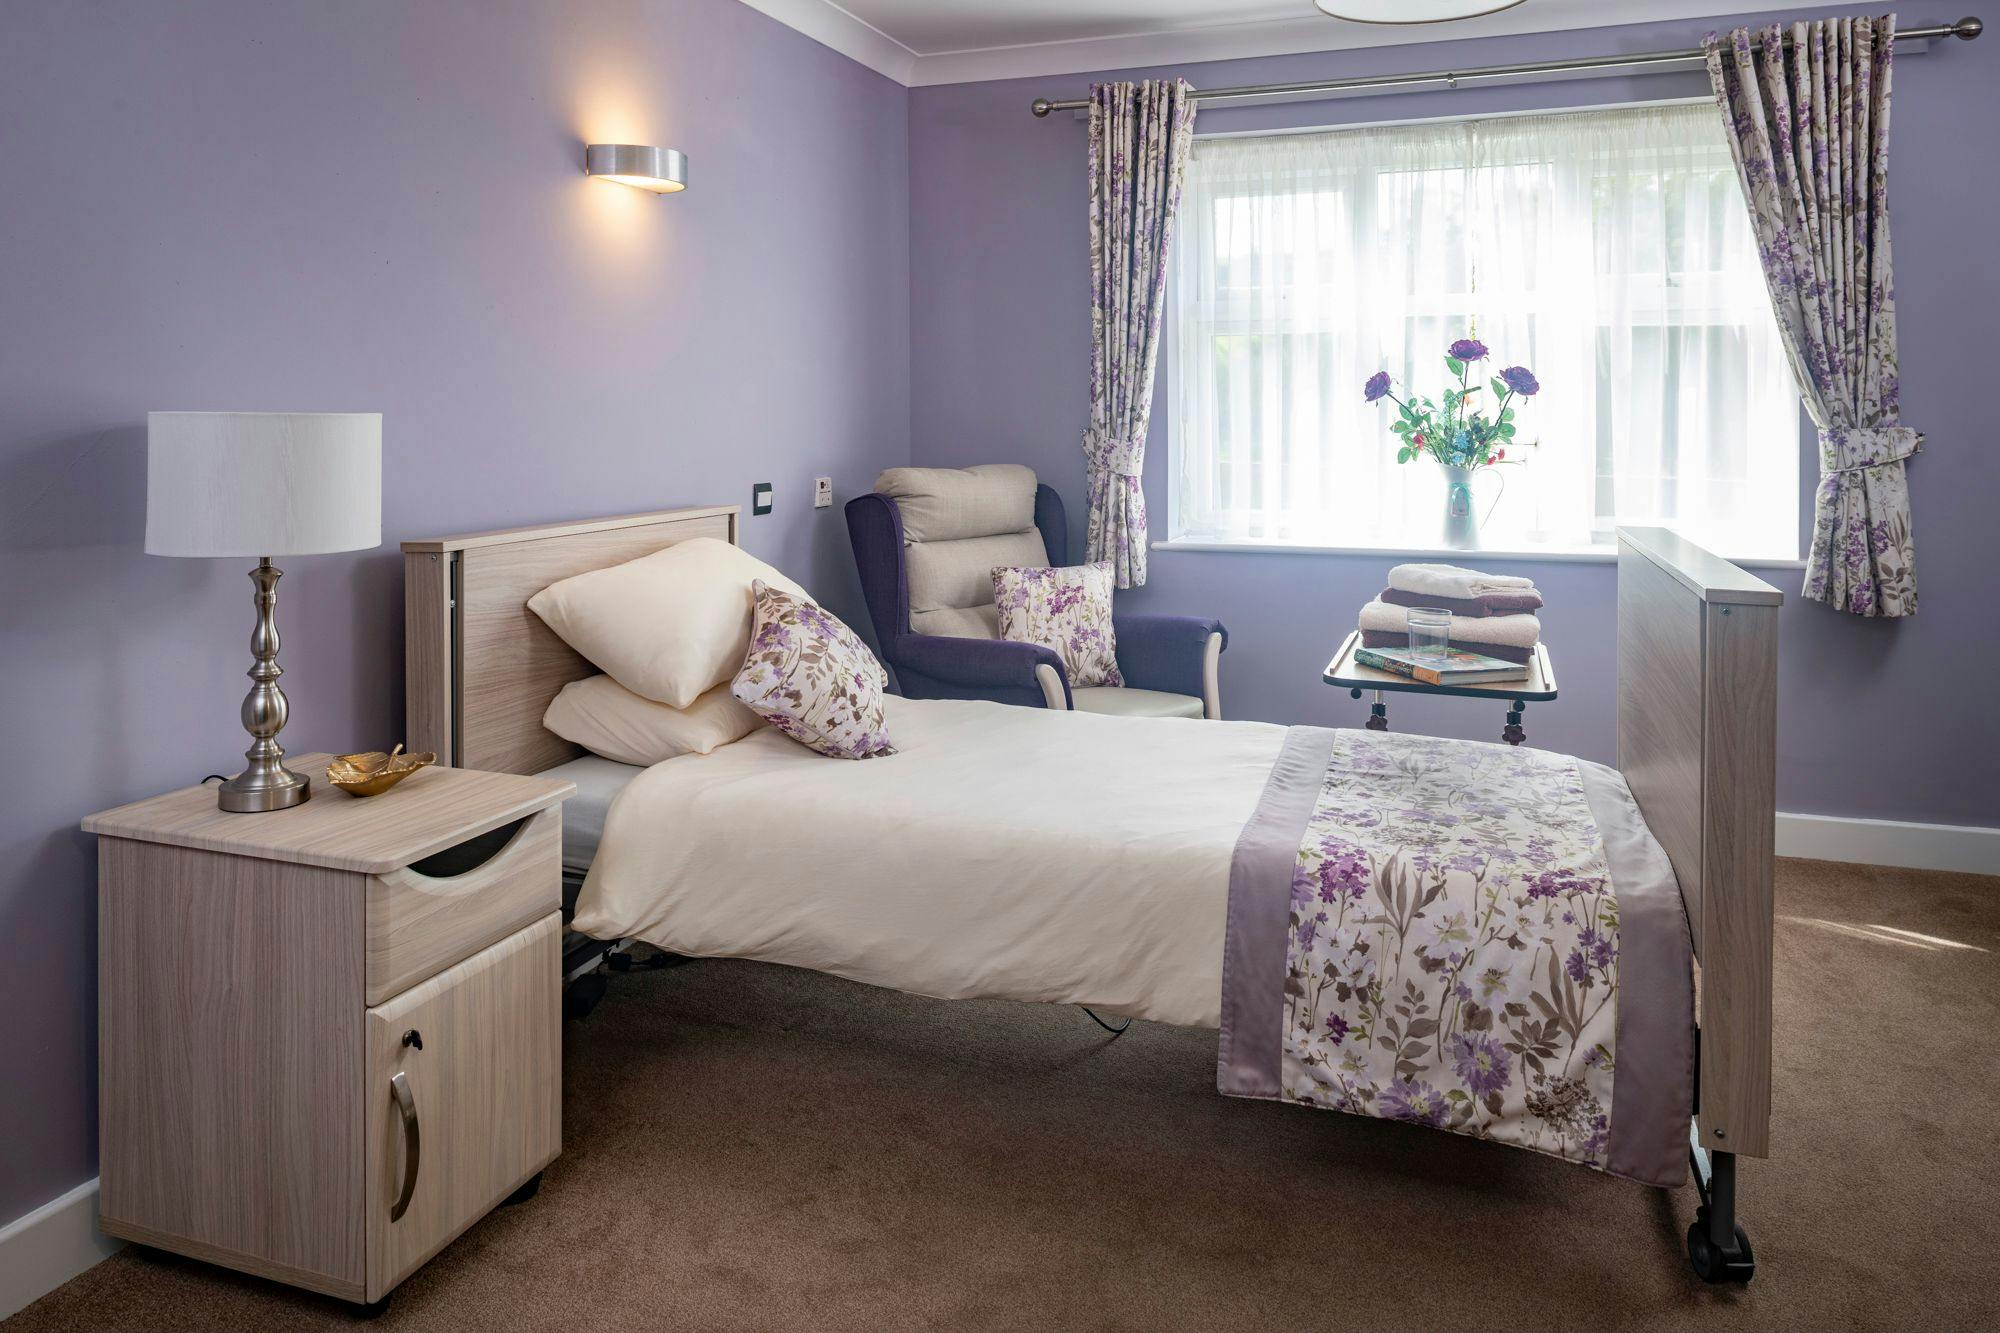 Bedroom at Grace Care Home in Thornbury, South Gloucestershire